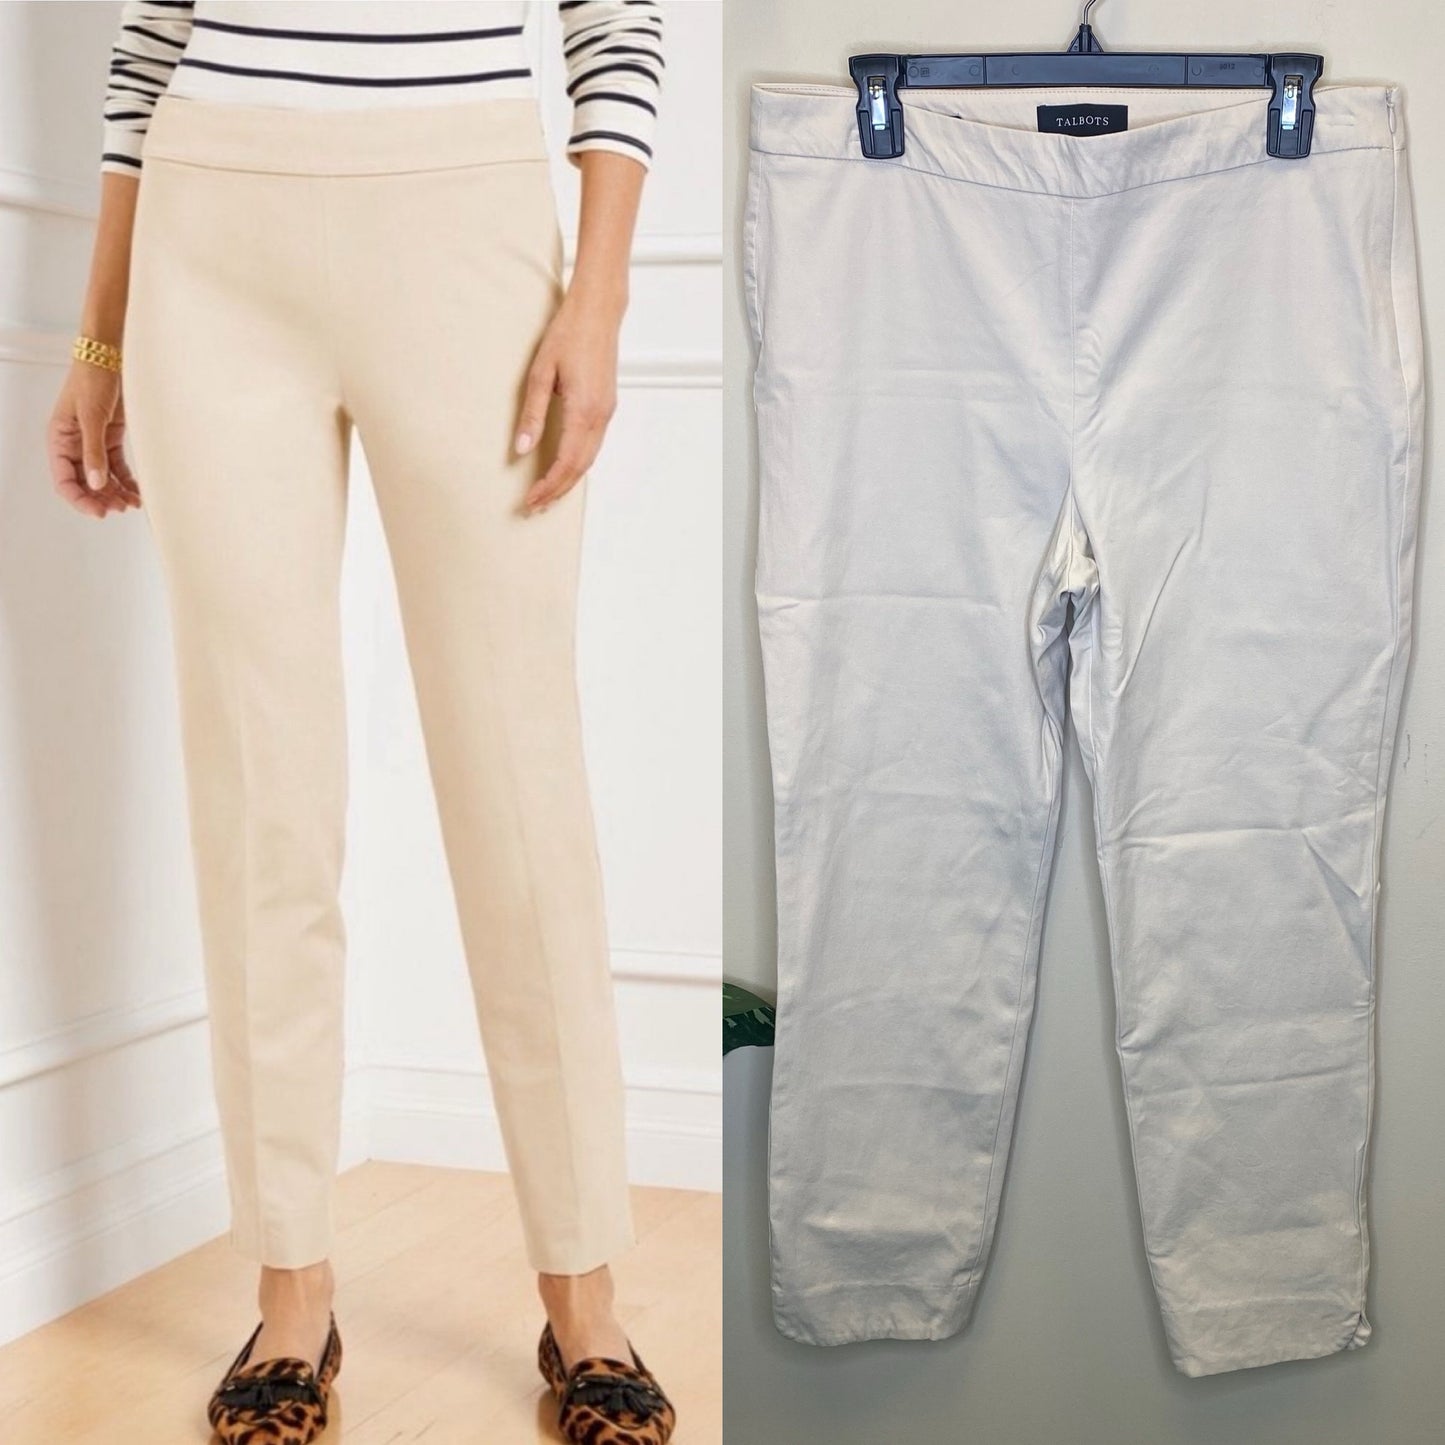 Talbots Beige Chatham Ankle Side Zip Pants - Size 10